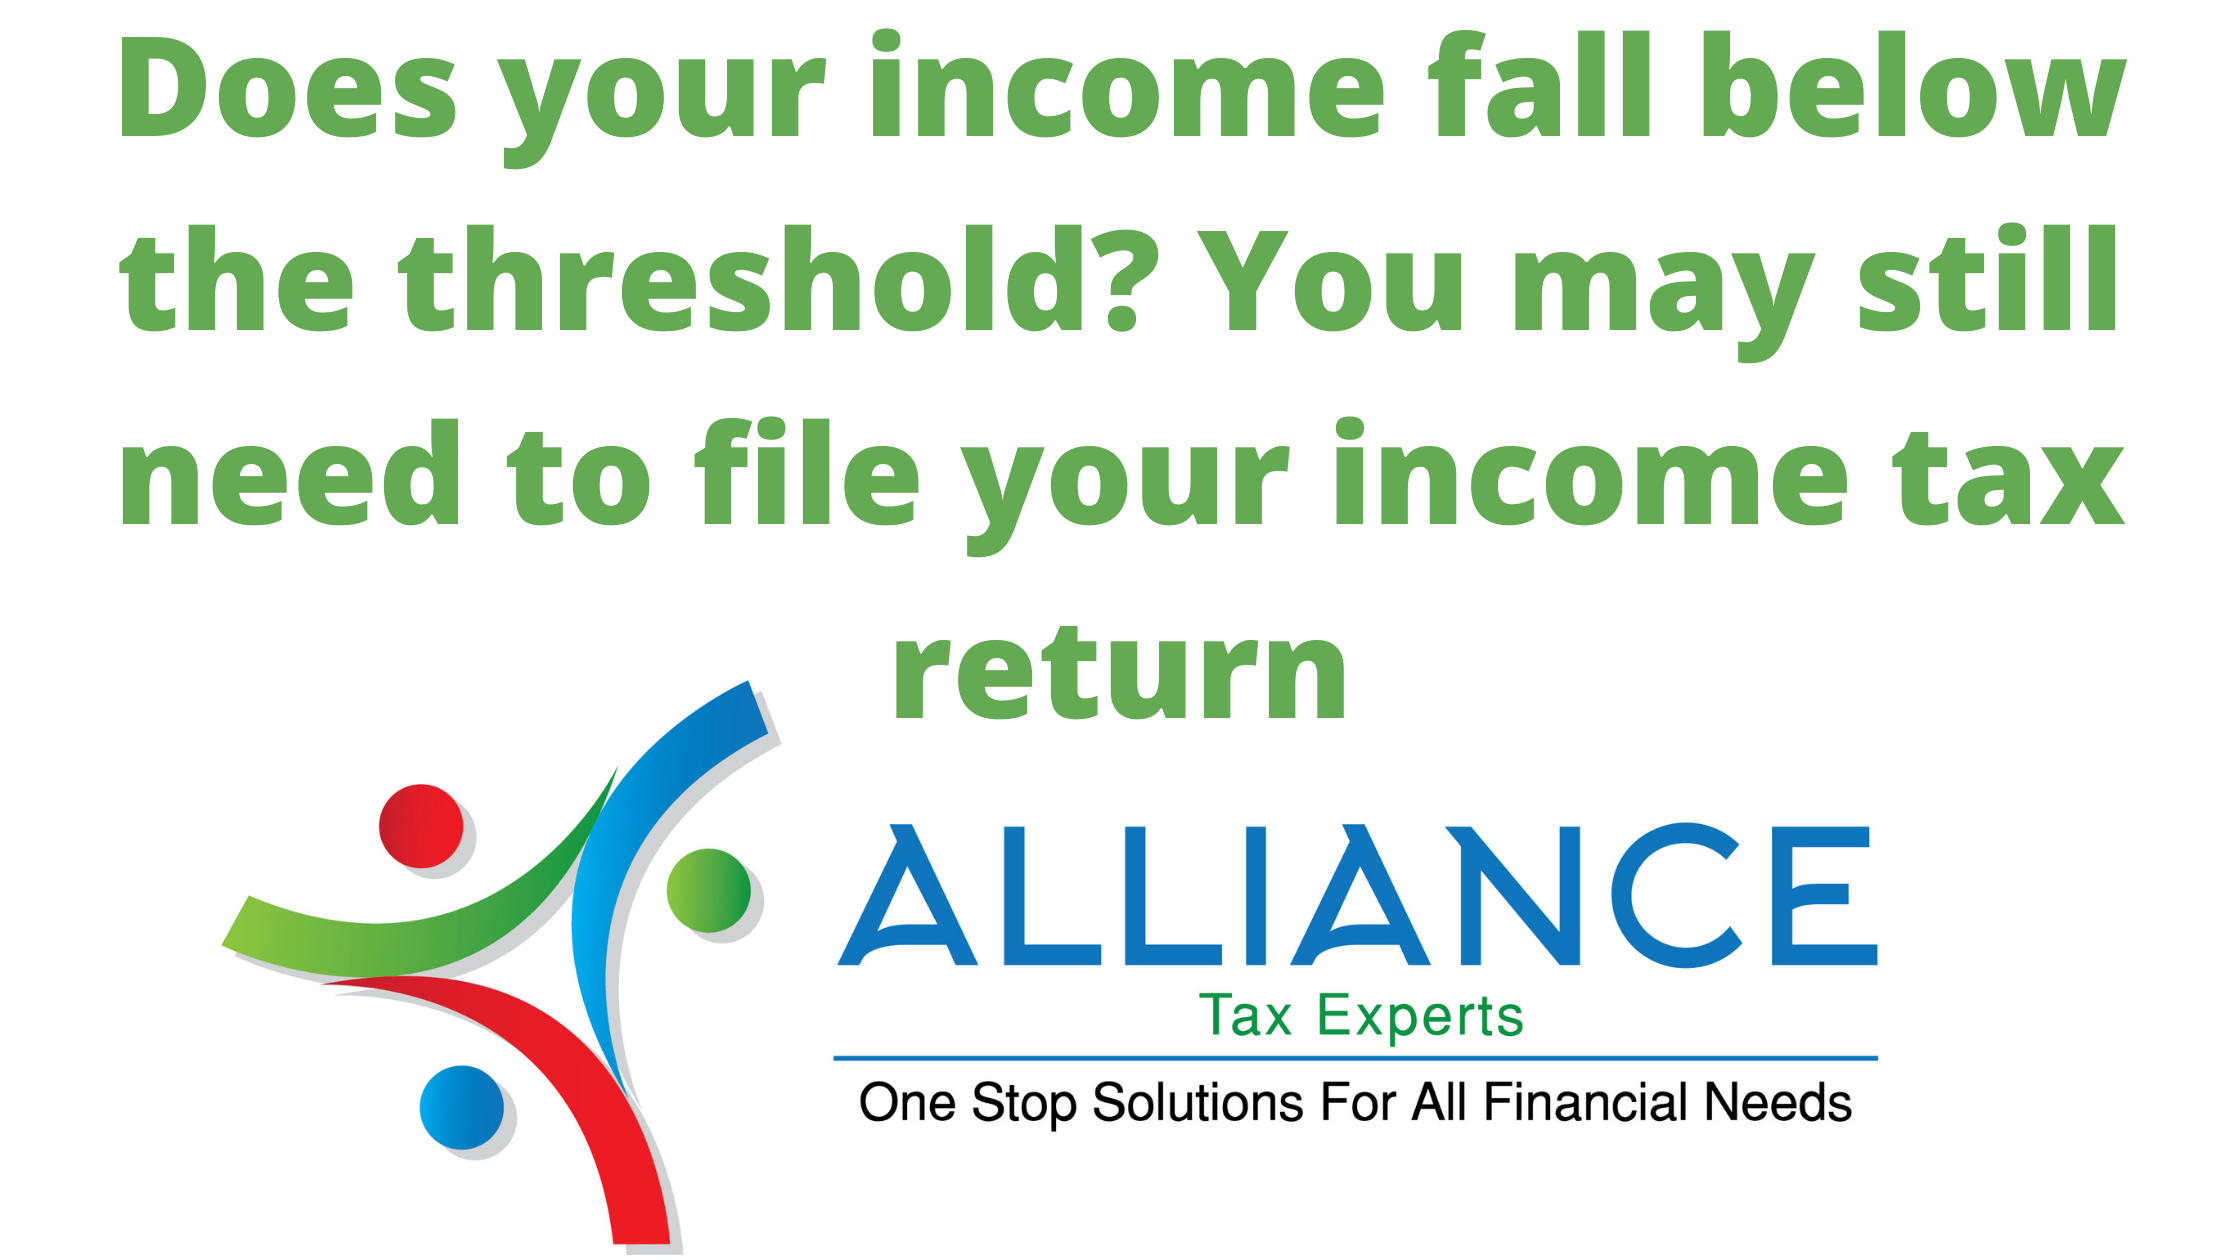 Alliance Tax Experts Does your fall below the threshold You